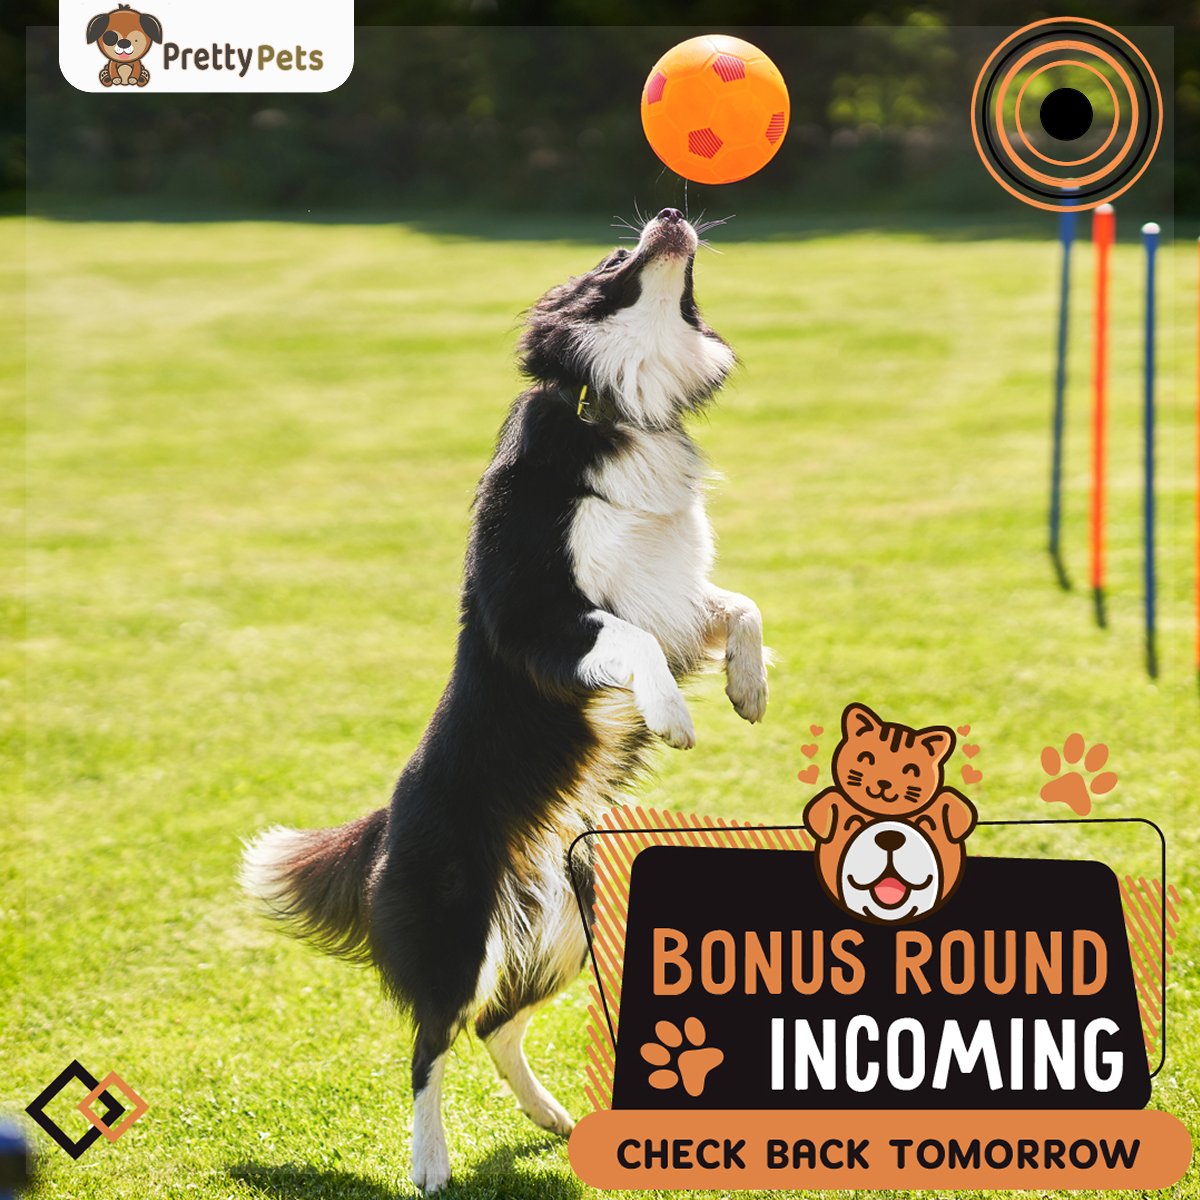 BONUS INCOMING! Only registered voters  with verified contact numbers on the website at prettypets.co.za can claim extra bonus votes tomorrow!

#prettypets #competitionsa #prettypetsza #pets #pet #dog #dogsouthafrica #mzansidogs #catinfluencer #child #furchild #furbaby